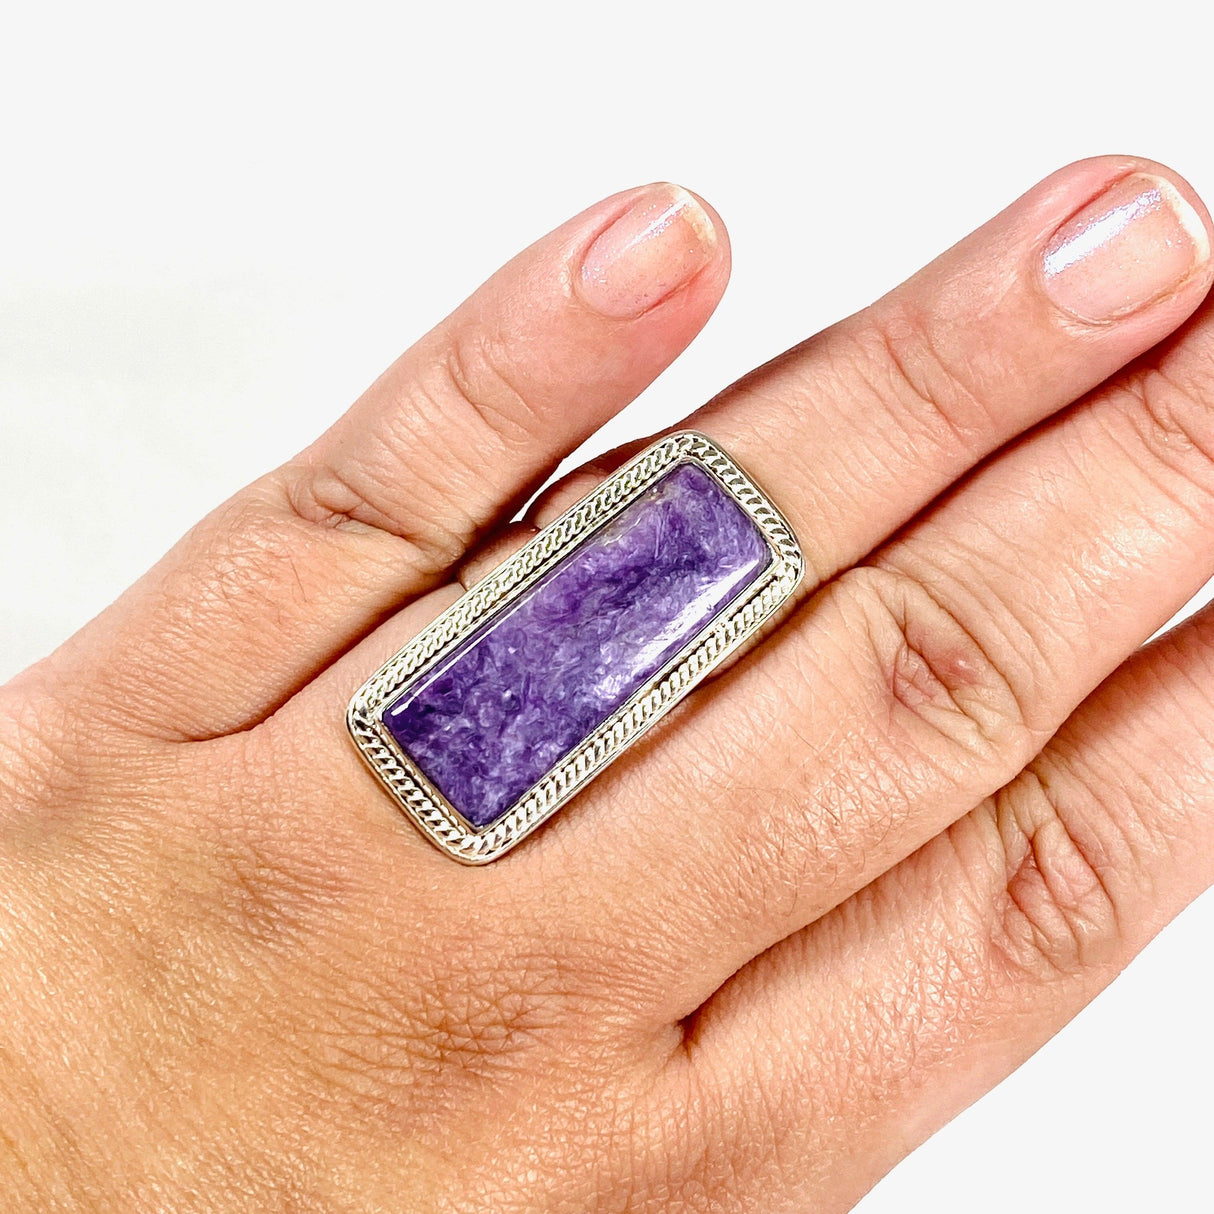 Purple Charoite rectangle ring in sterling silver shown on a hand